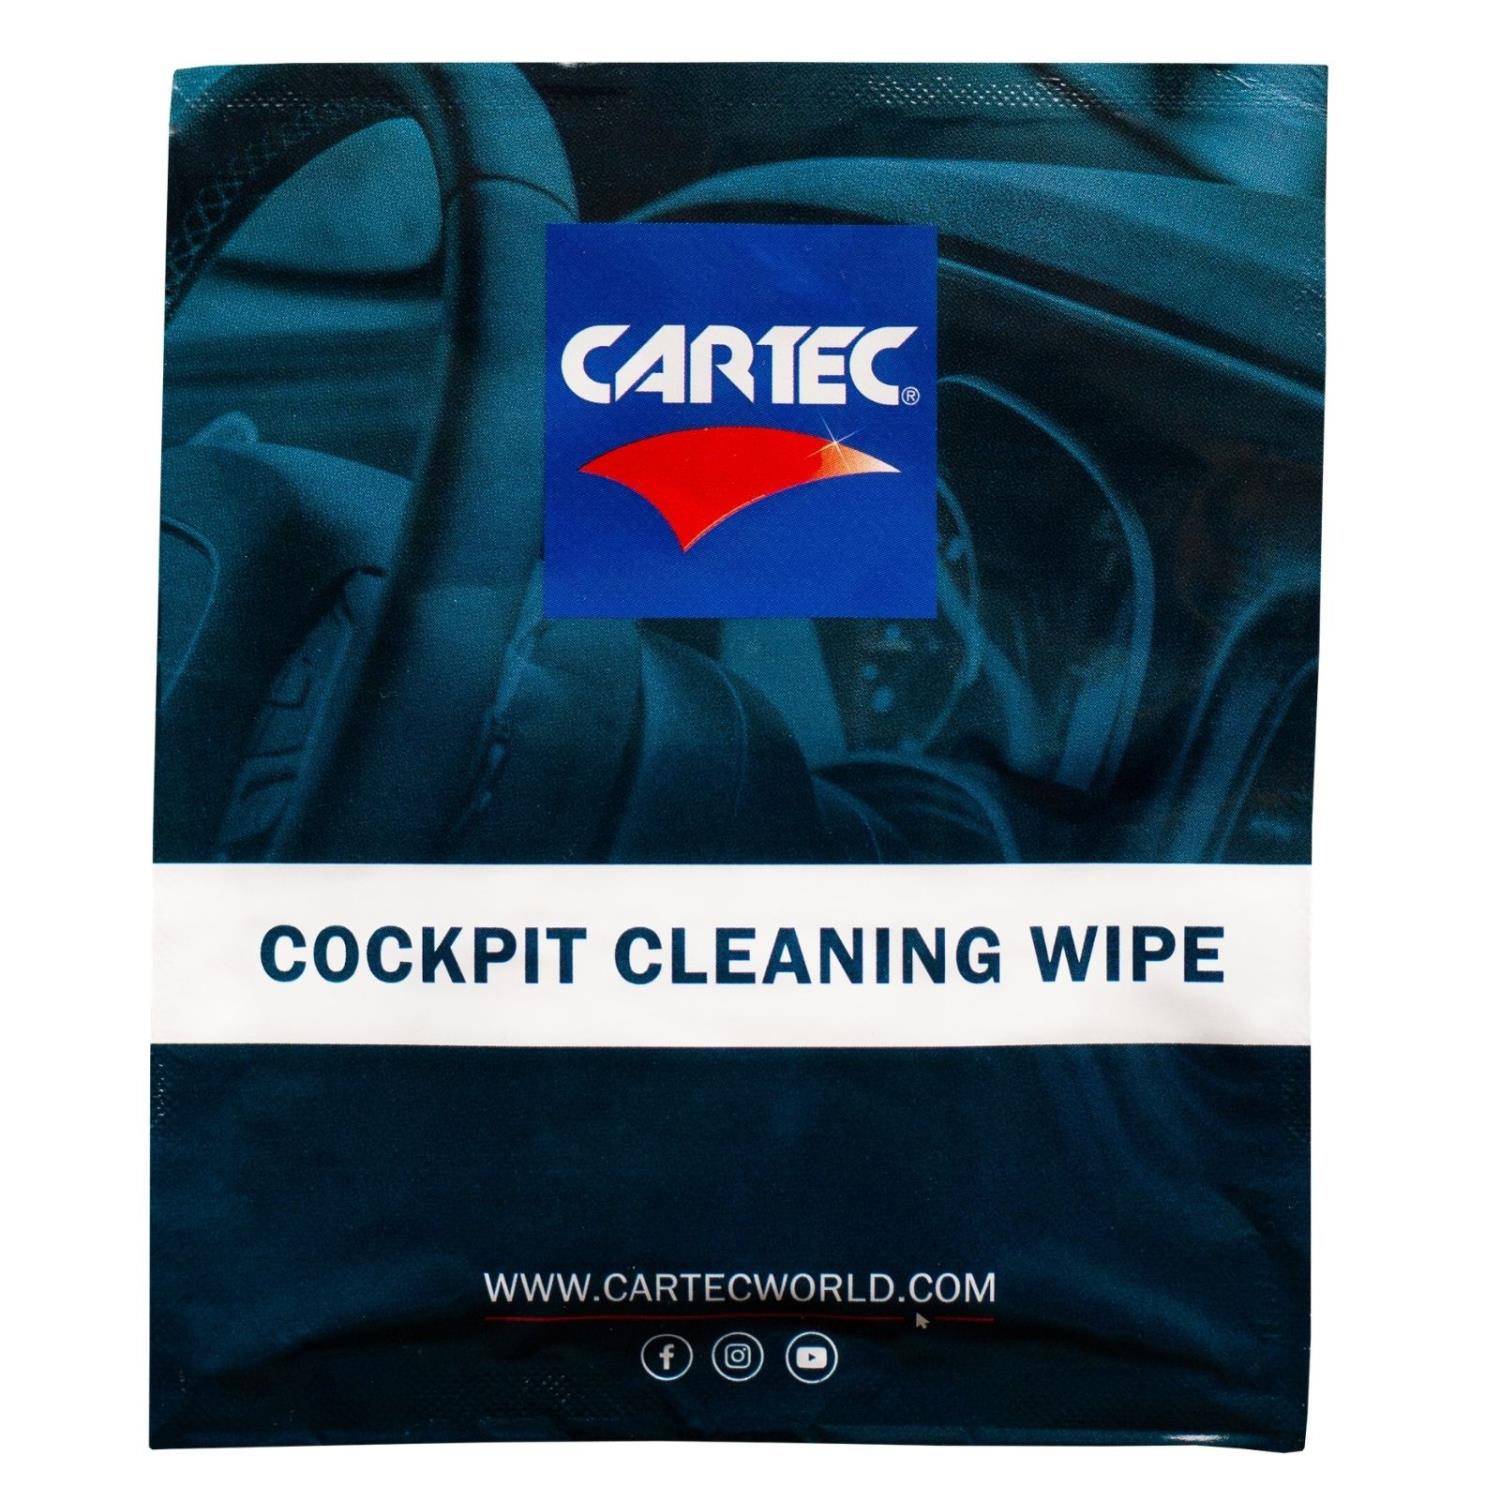 Cartec Cockpit Cleaning Wipe